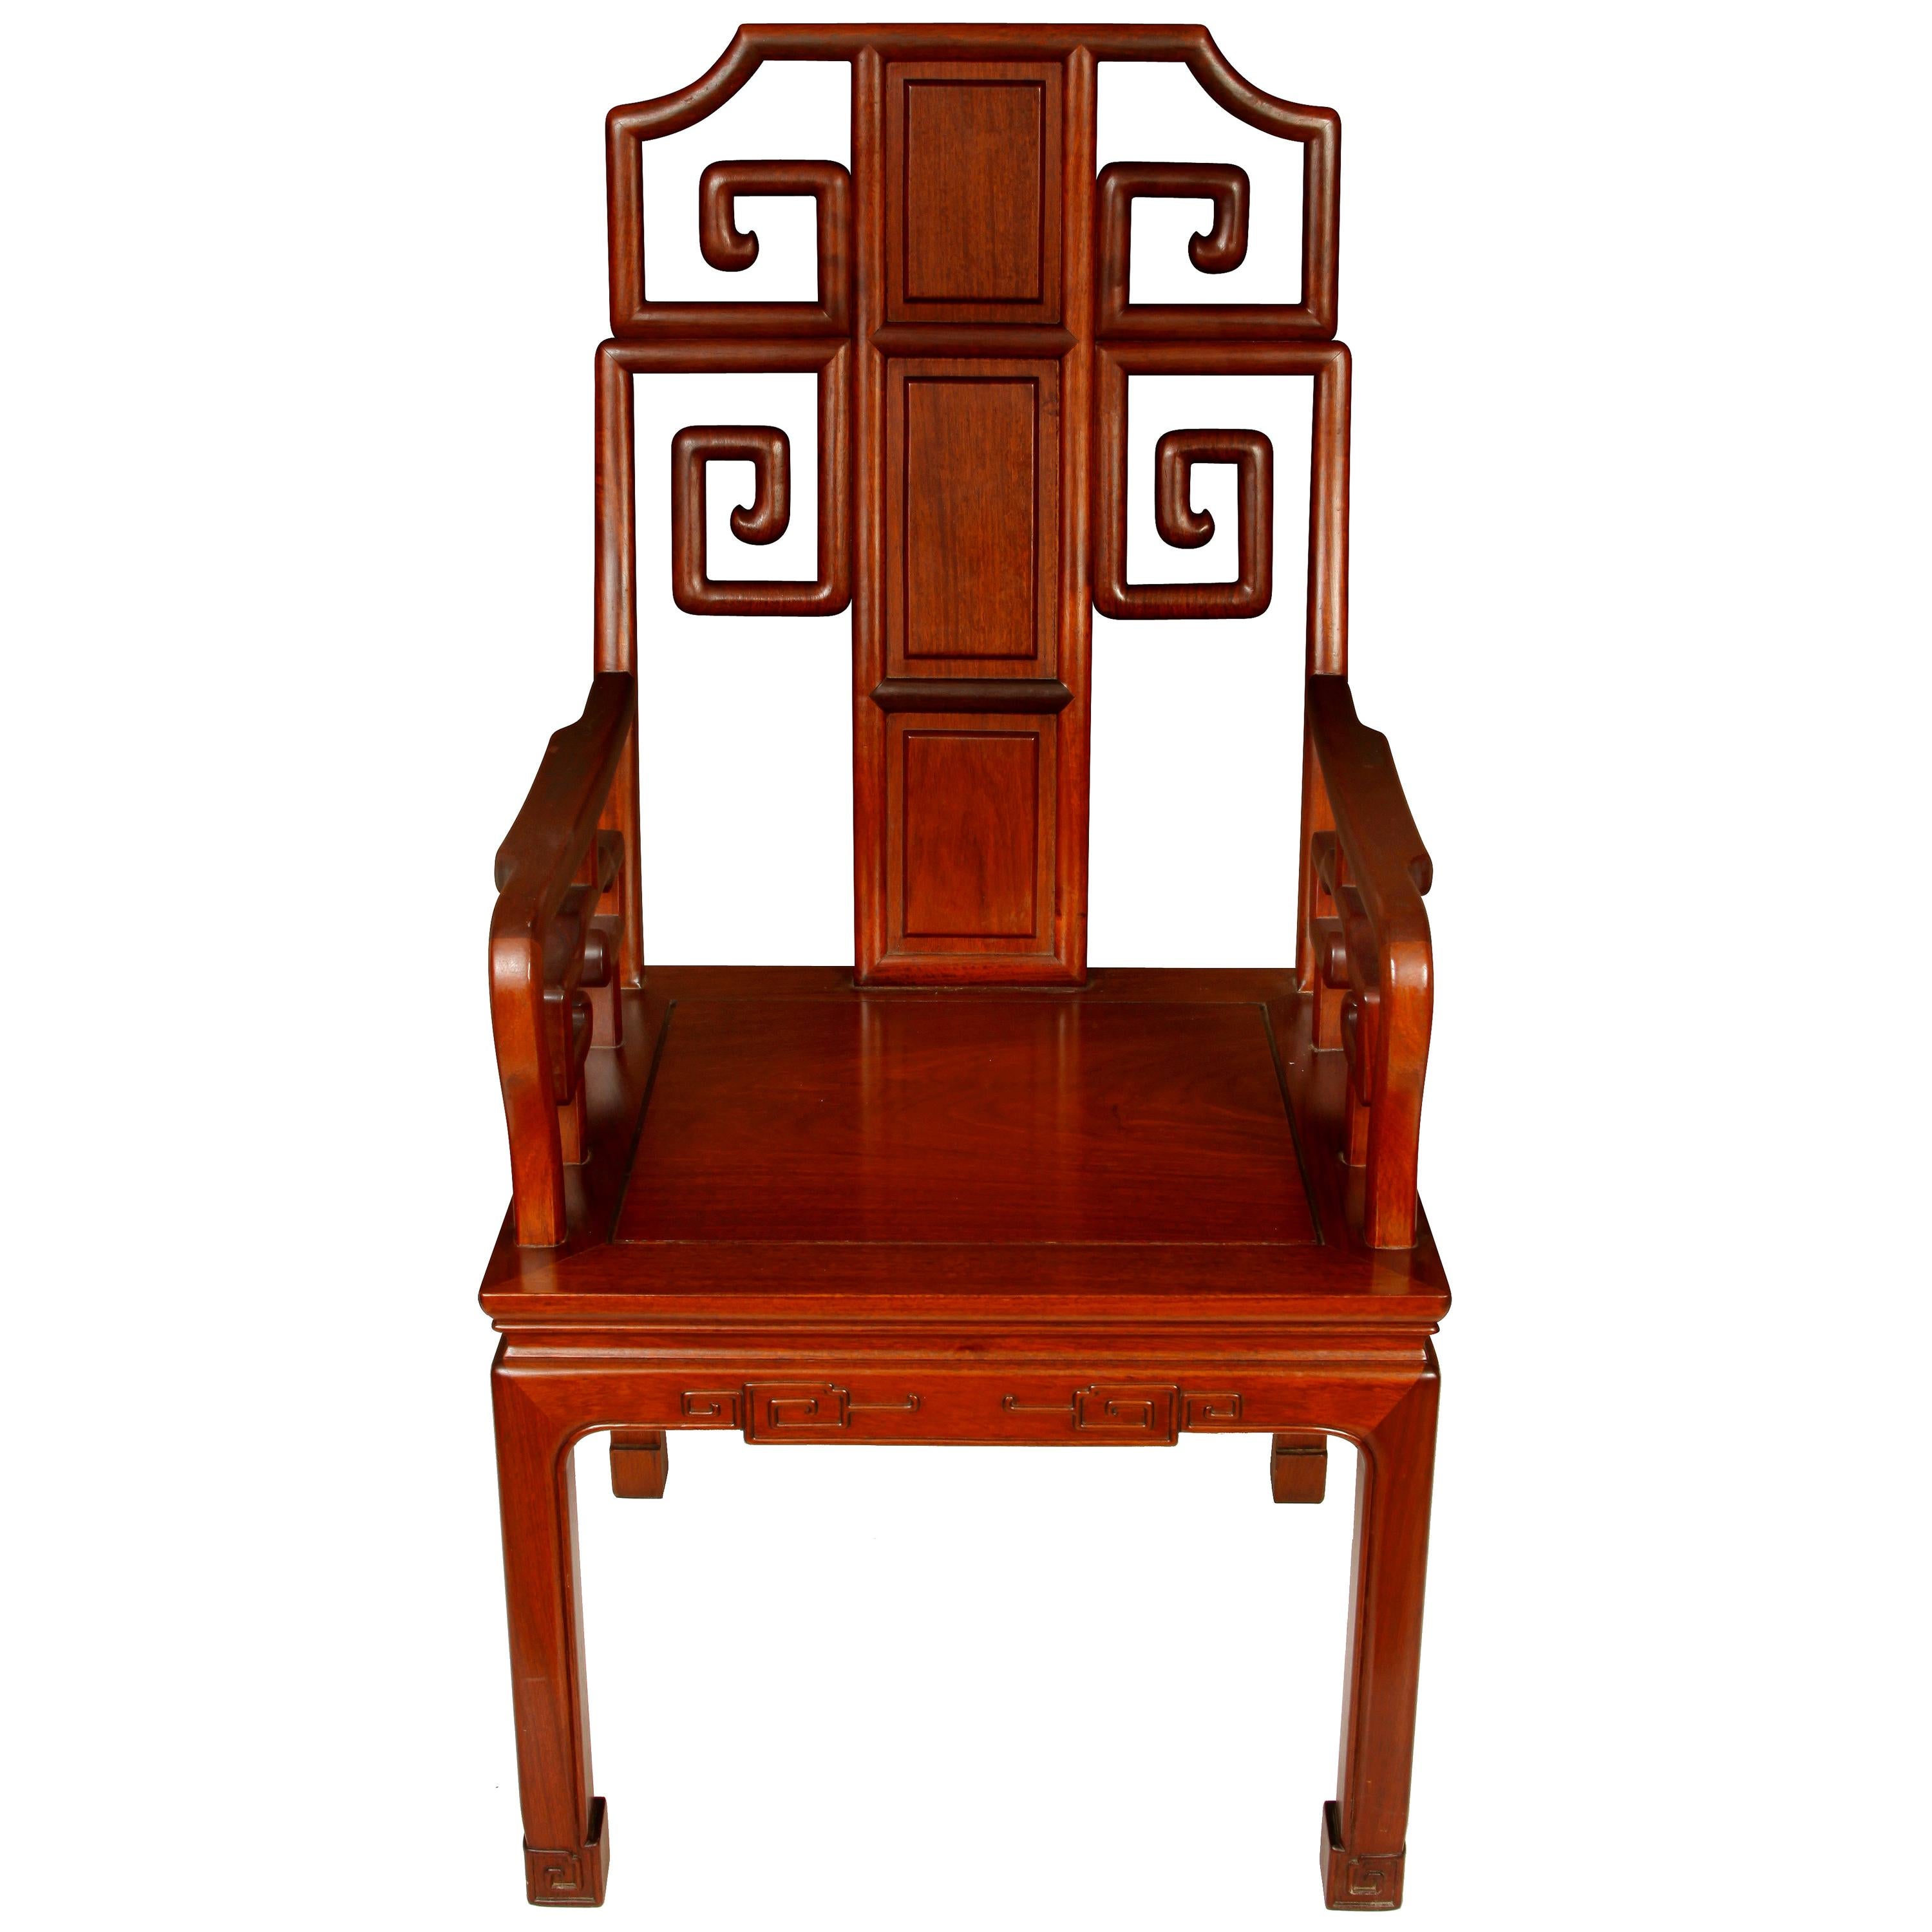 Chinese Rosewood Asian Fretwork Armchair